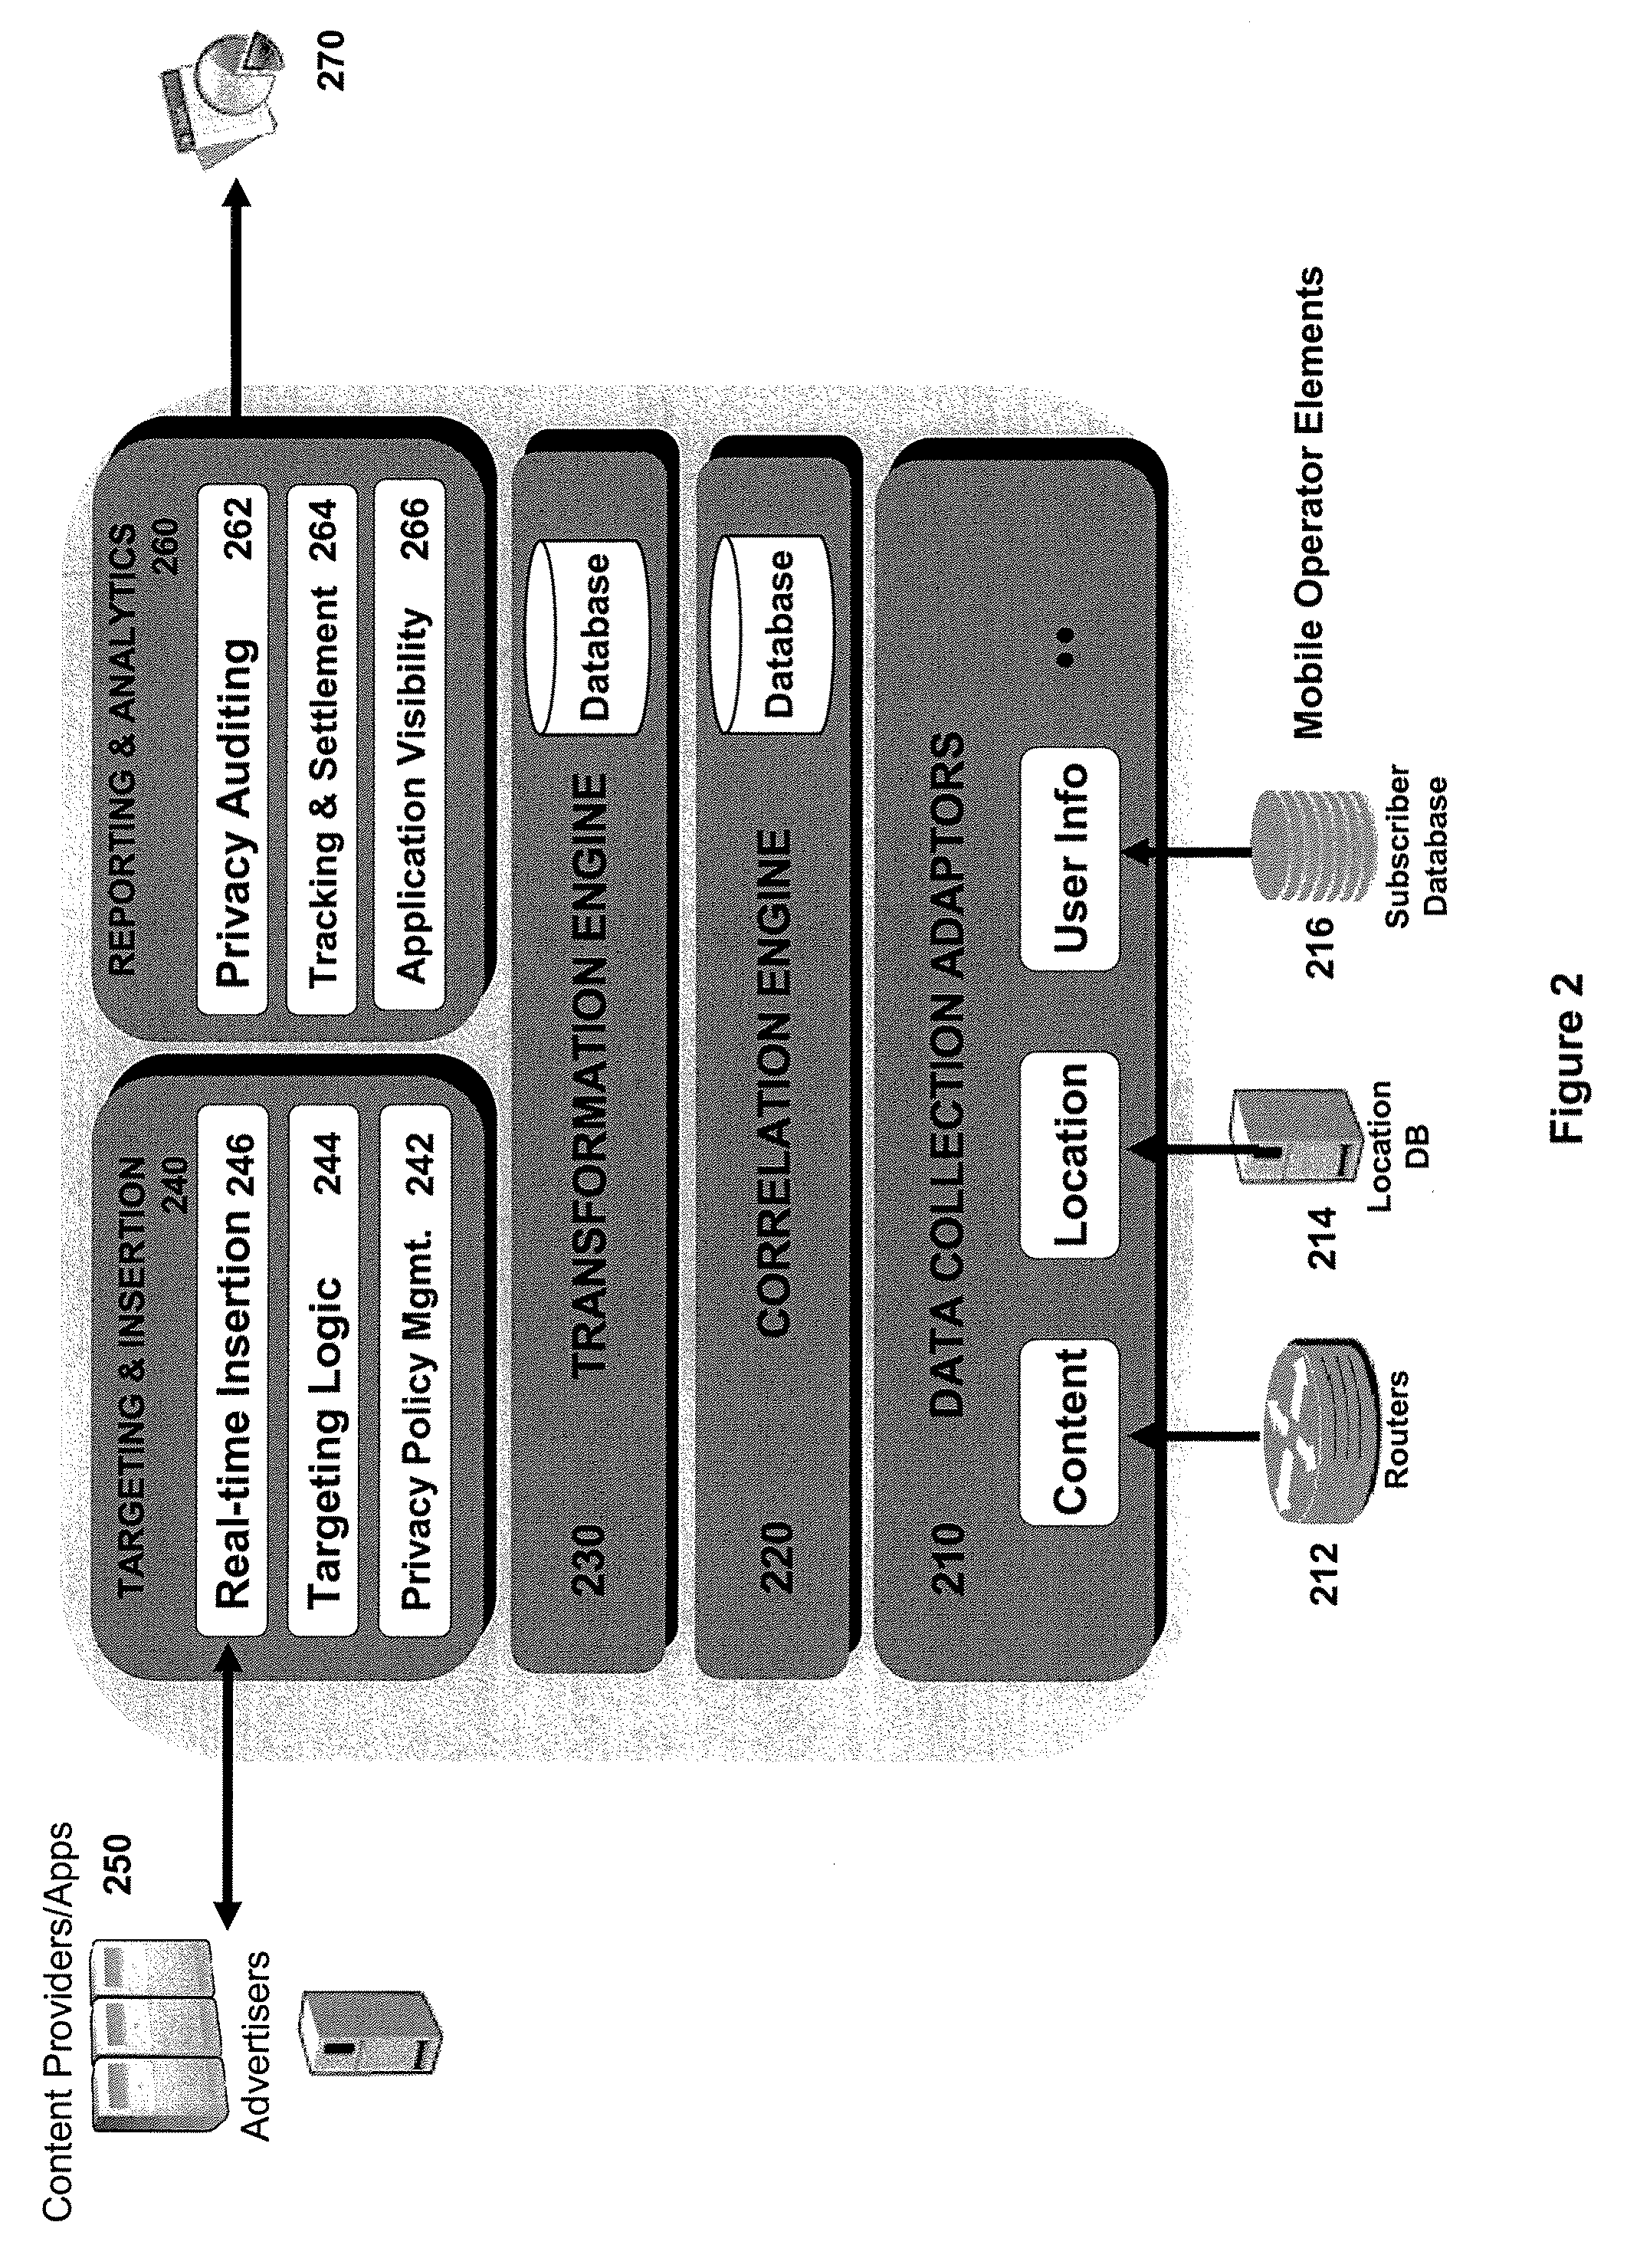 System and Method for Creating Anonymous User Profiles from a Mobile Data Network